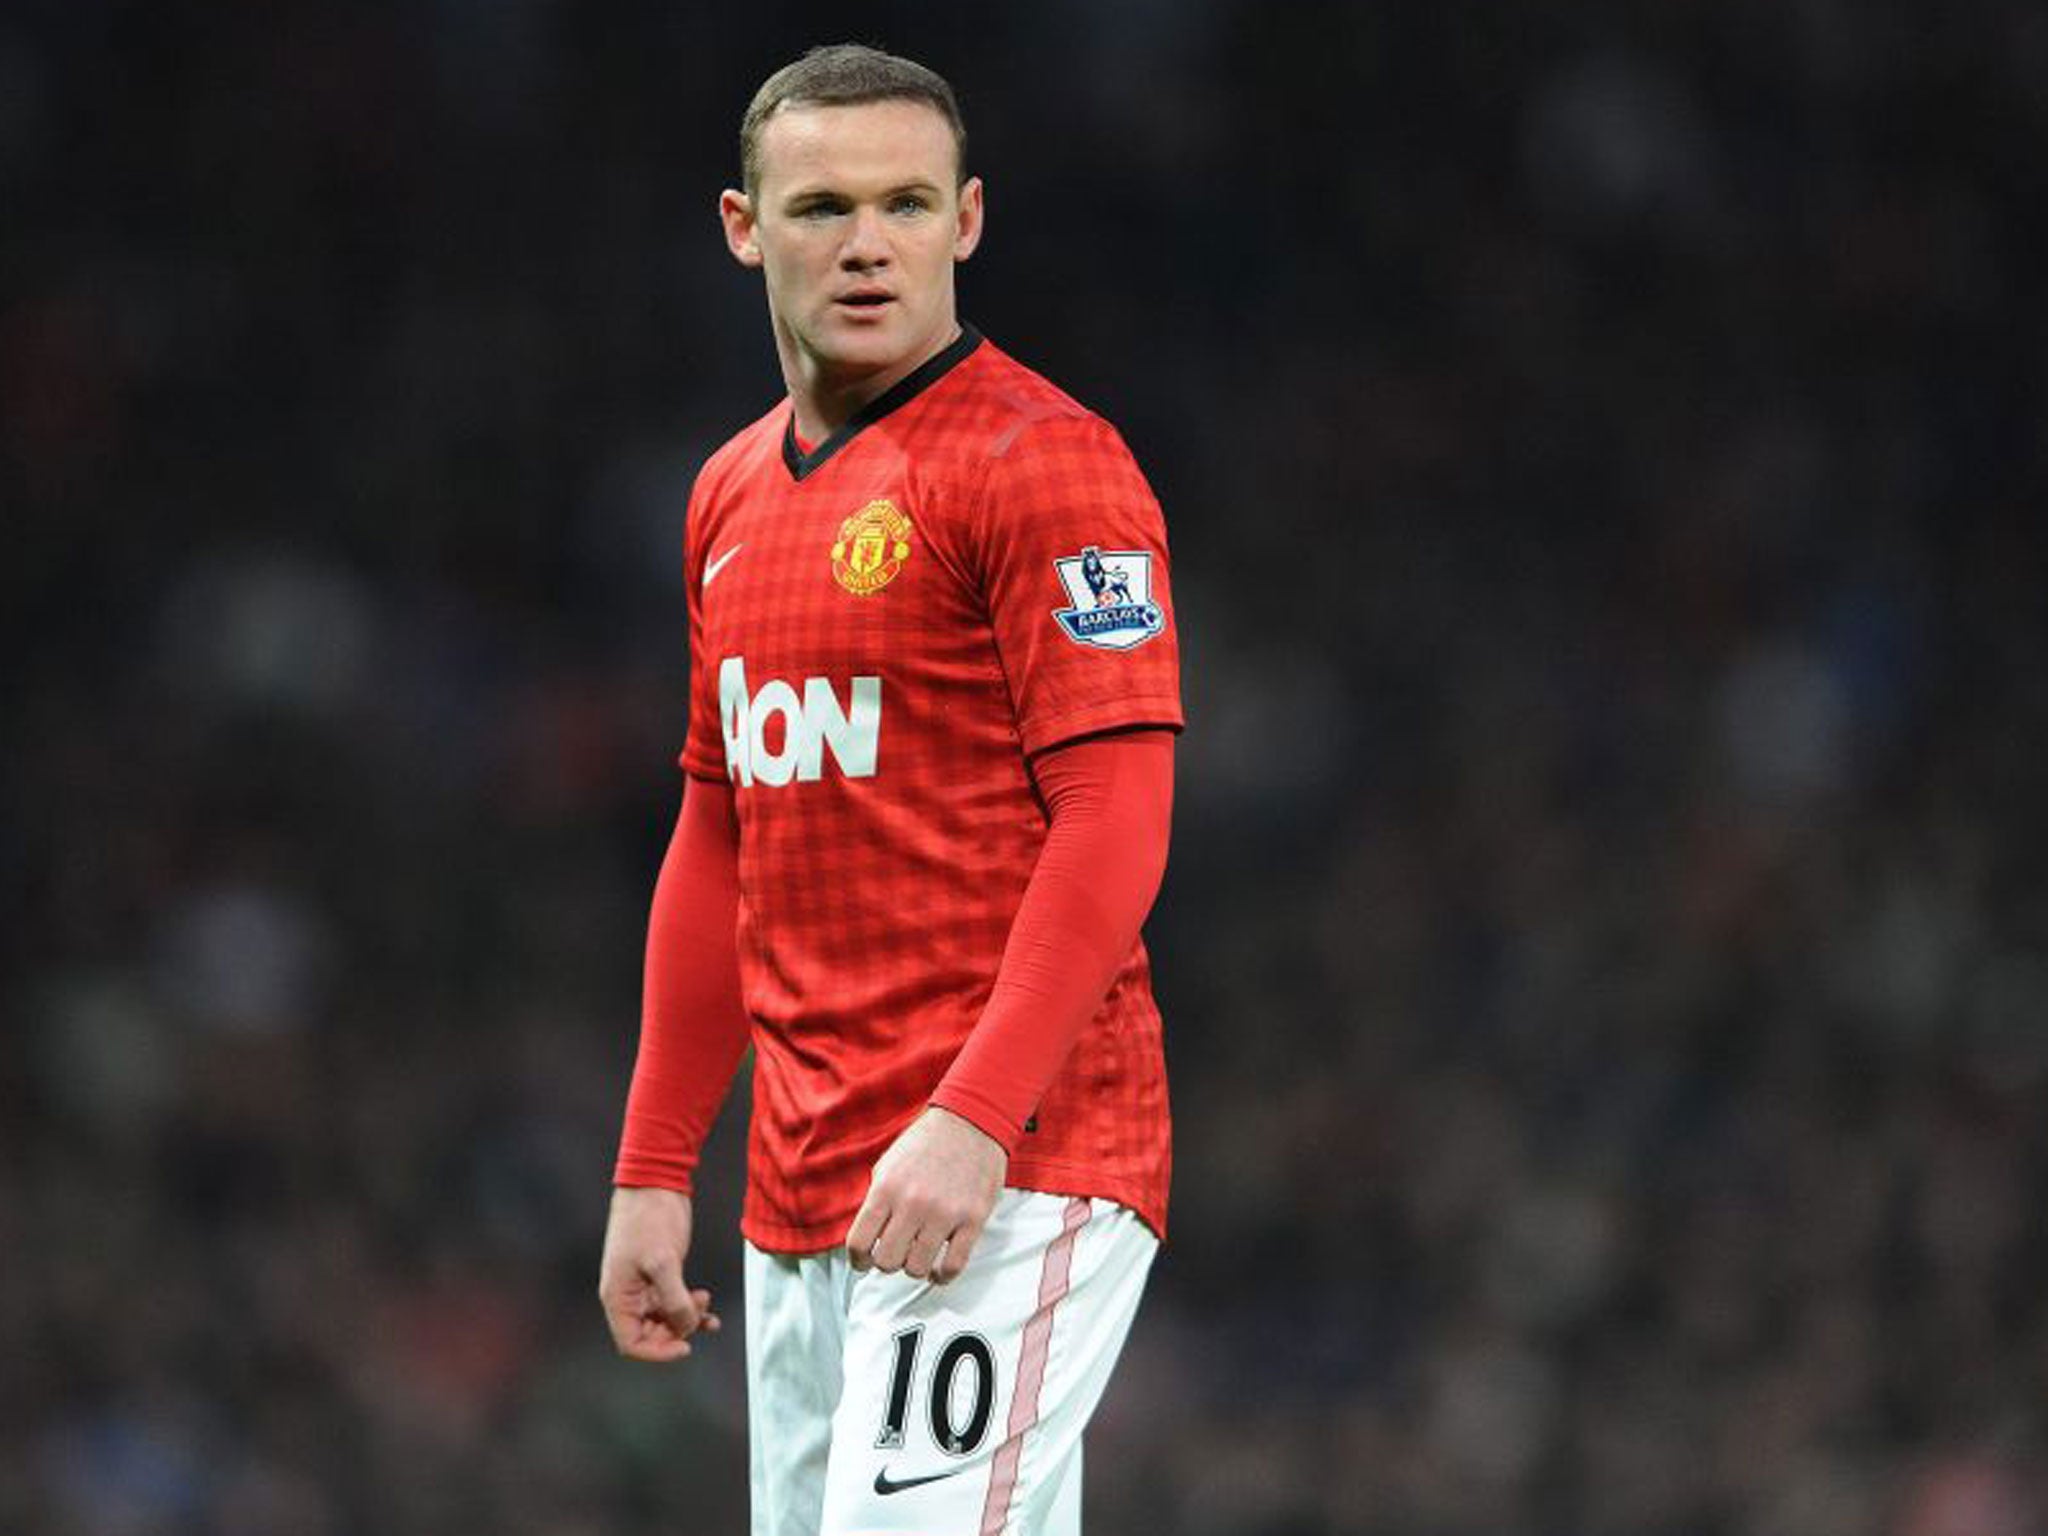 Manchester United's Wayne Rooney during an English Premier League soccer match